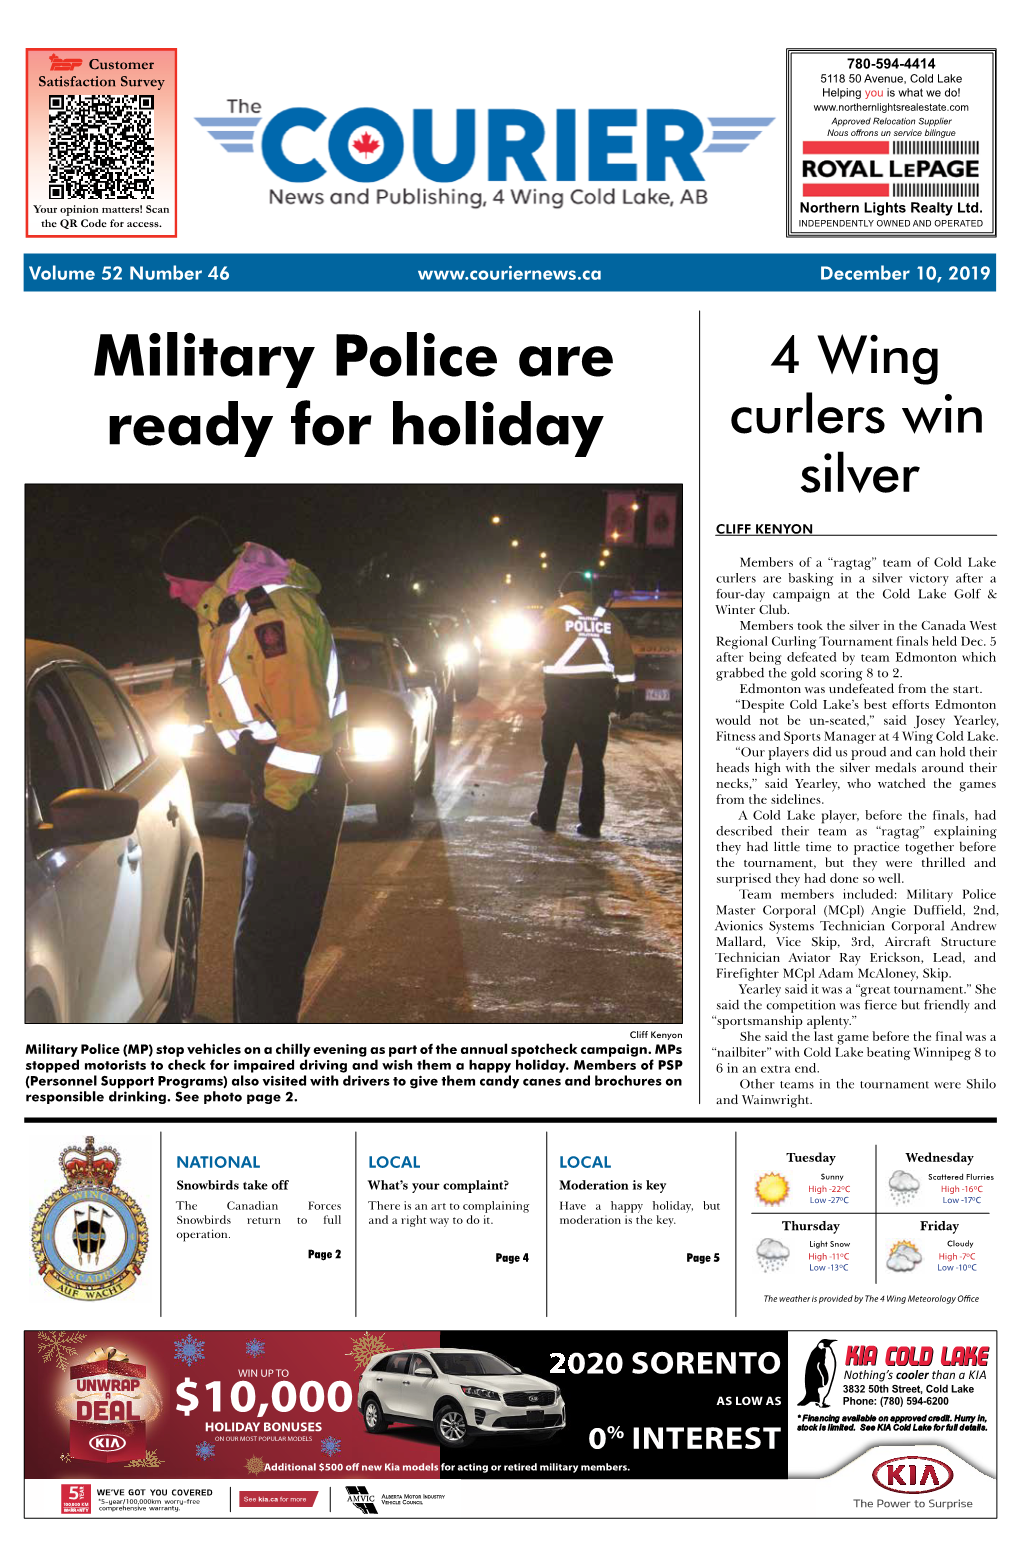 Military Police Are Ready for Holiday